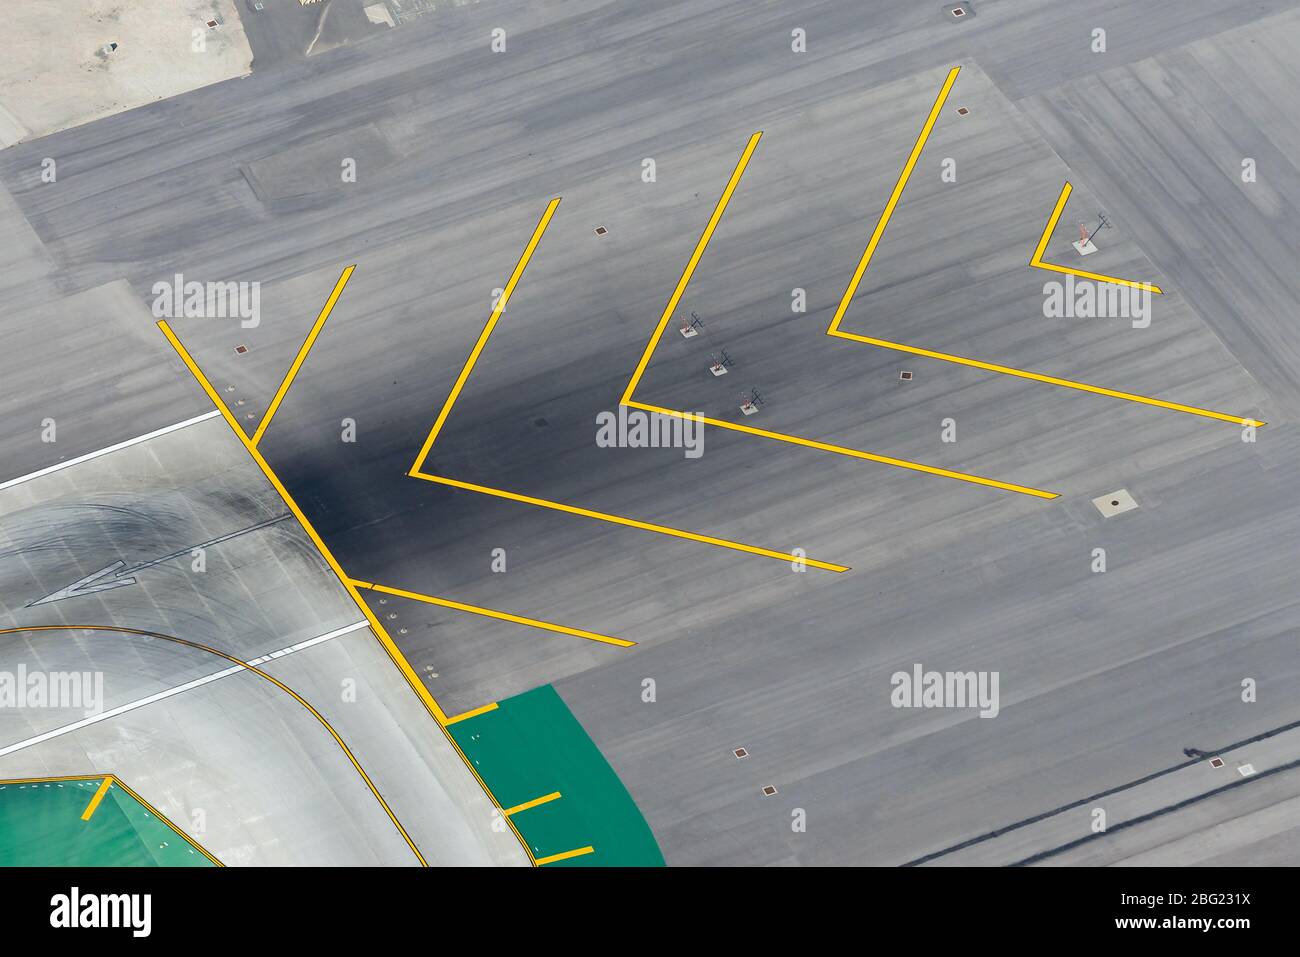 runway-yellow-chevrons-used-as-blast-pads-in-an-international-airport-aerial-view-of-large-runway-stopway-with-yellow-arrows-indicating-direction-2BG231X.jpg